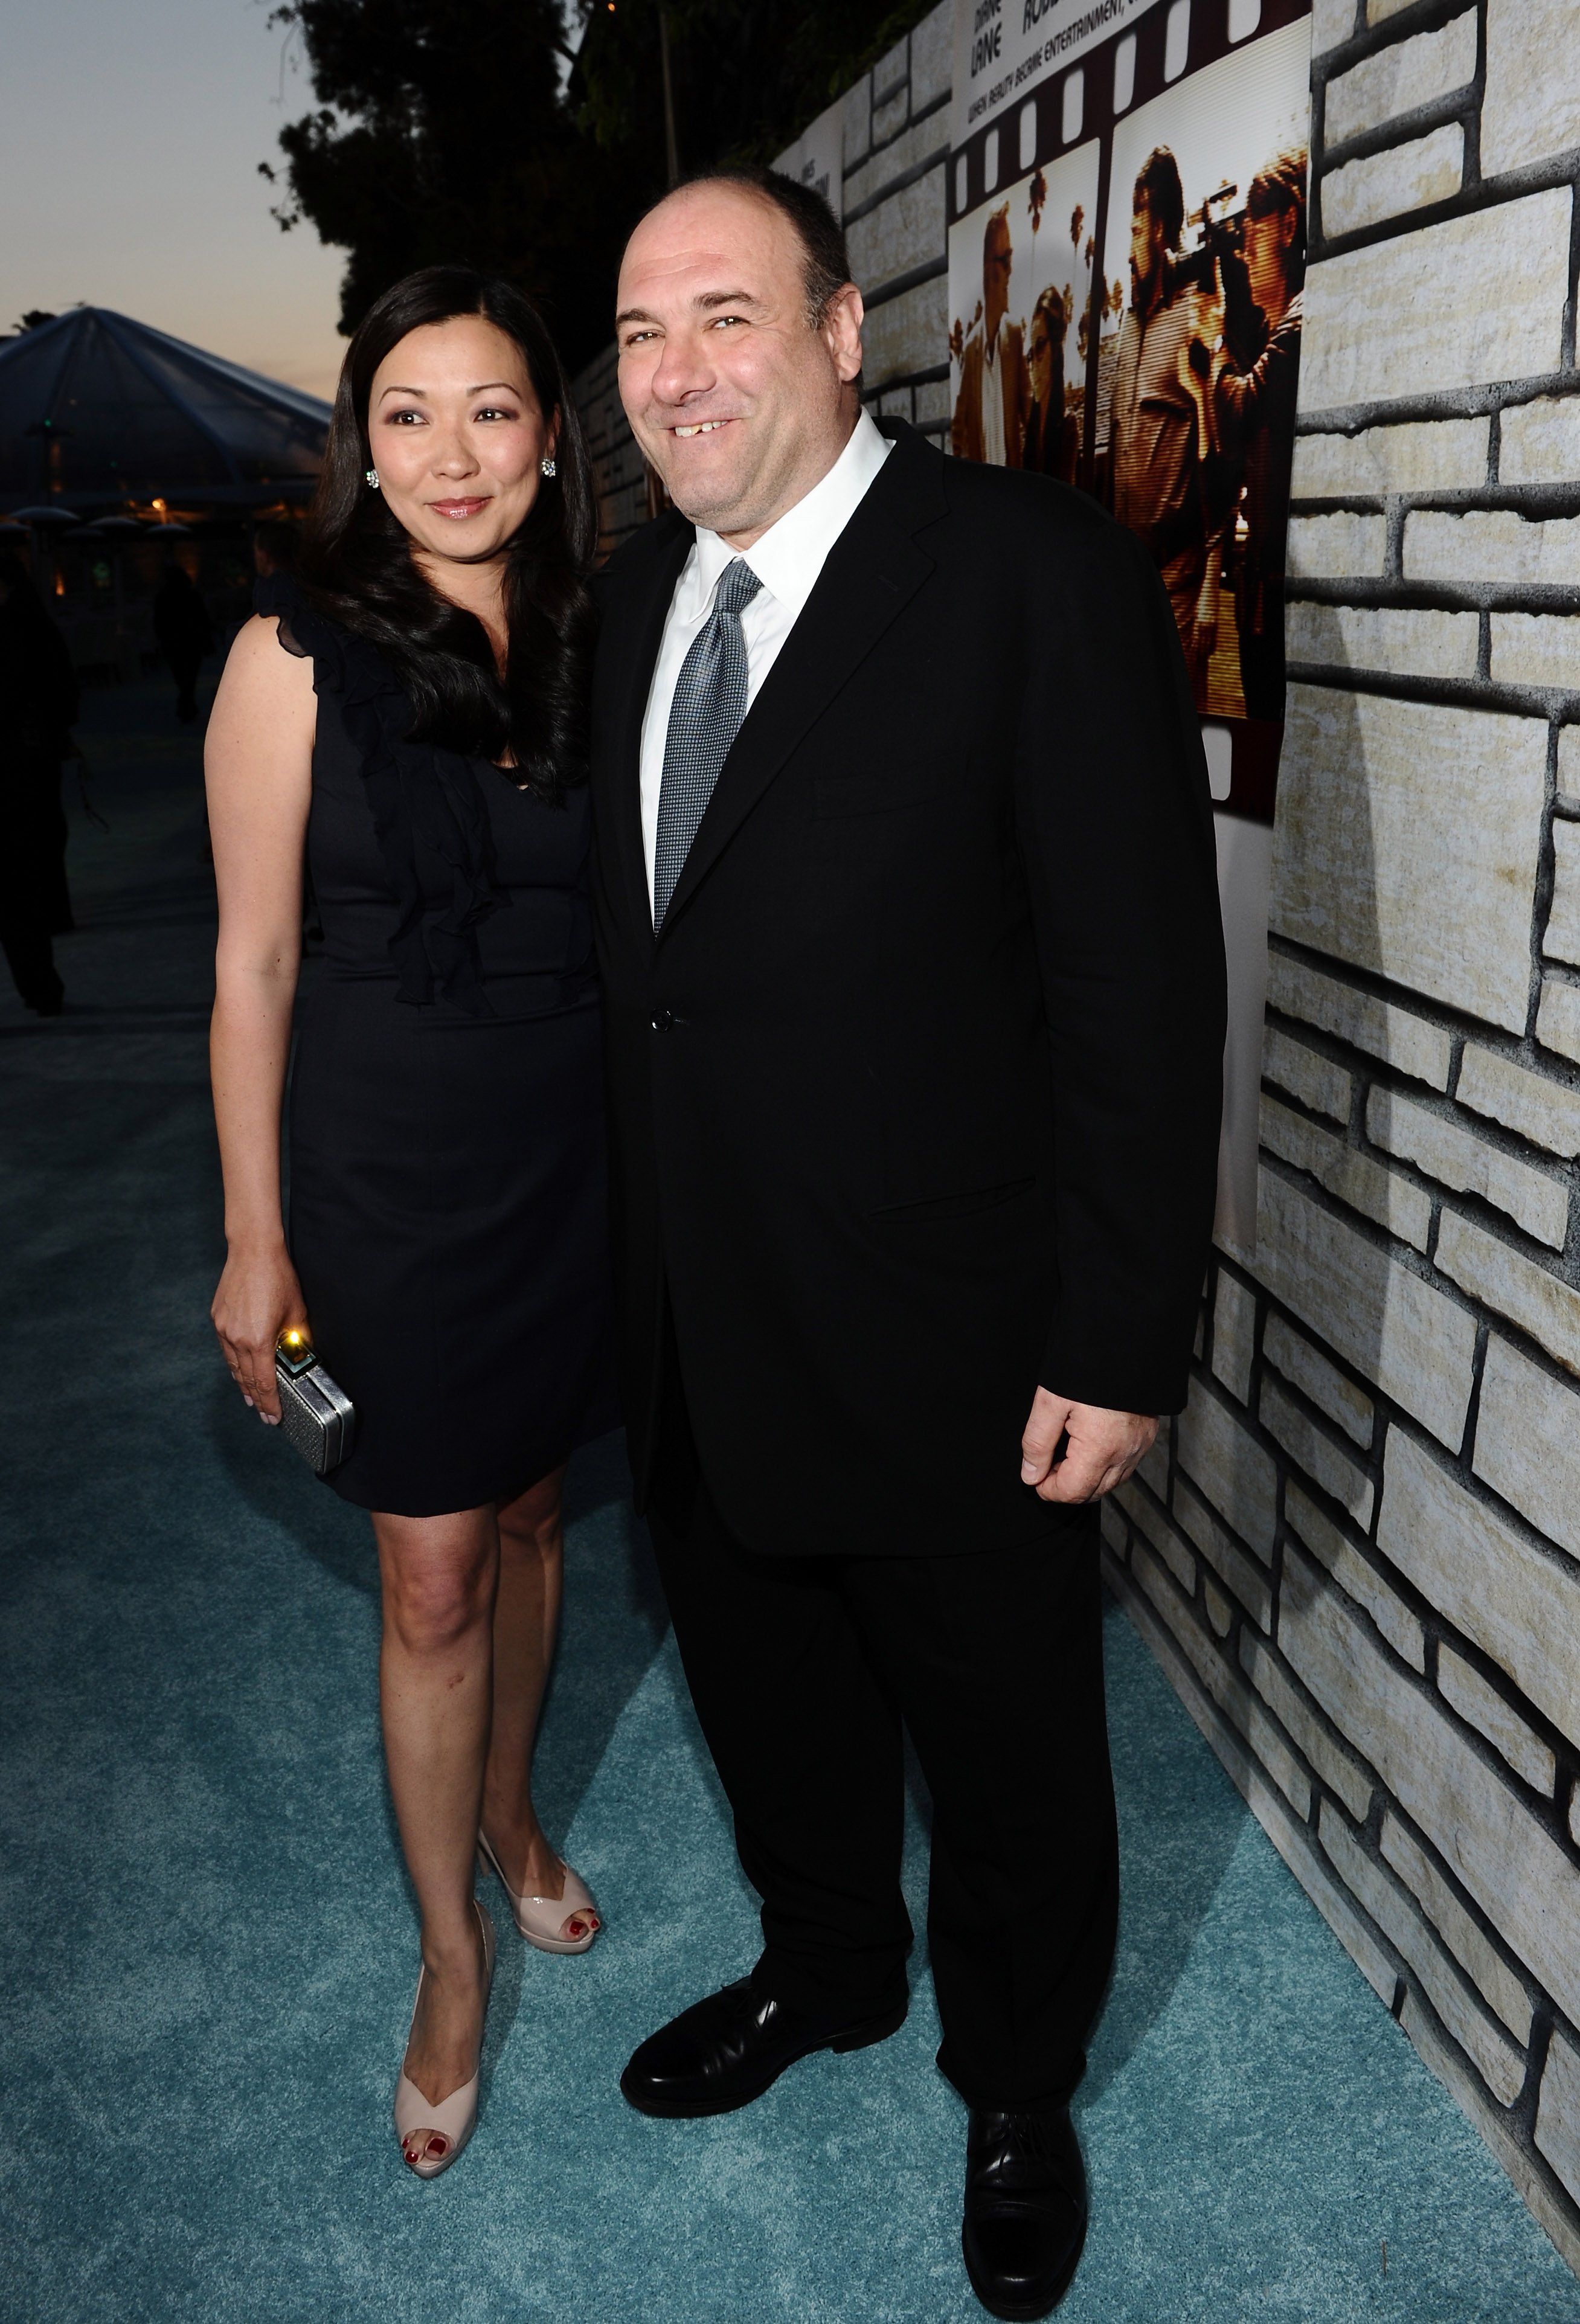 Deborah Lin and James Gandolfini at the Paramount Theatre on April 11, 2011 in Hollywood, California. | Source: Getty Images